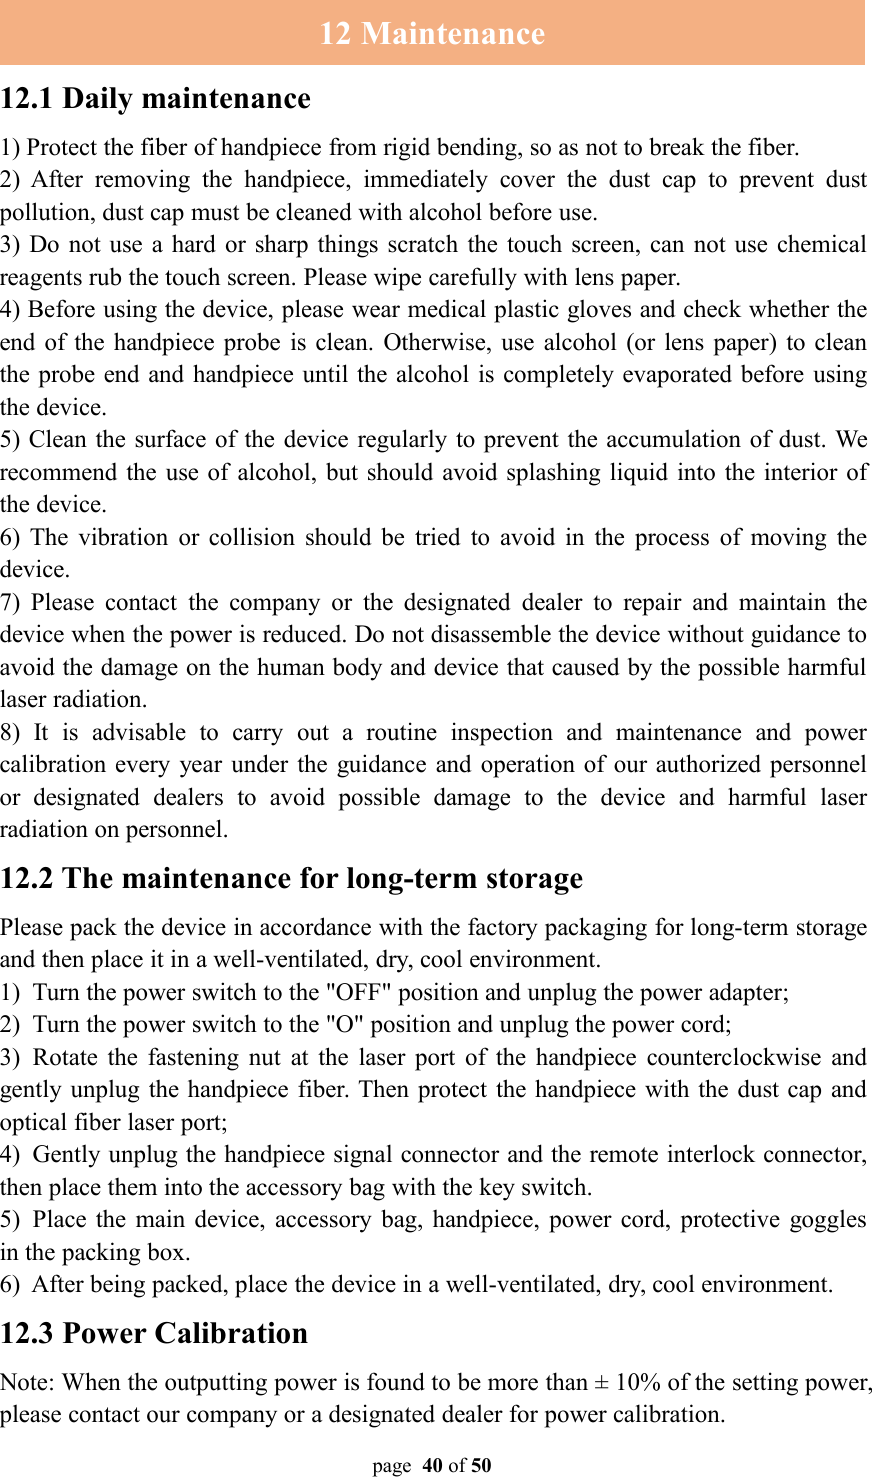 page 40 of 5012 Maintenance12.1 Daily maintenance1) Protect the fiber of handpiece from rigid bending, so as not to break the fiber.2) After removing the handpiece, immediately cover the dust cap to prevent dustpollution, dust cap must be cleaned with alcohol before use.3) Do not use a hard or sharp things scratch the touch screen, can not use chemicalreagents rub the touch screen. Please wipe carefully with lens paper.4) Before using the device, please wear medical plastic gloves and check whether theend of the handpiece probe is clean. Otherwise, use alcohol (or lens paper) to cleanthe probe end and handpiece until the alcohol is completely evaporated before usingthe device.5) Clean the surface of the device regularly to prevent the accumulation of dust. Werecommend the use of alcohol, but should avoid splashing liquid into the interior ofthe device.6) The vibration or collision should be tried to avoid in the process of moving thedevice.7) Please contact the company or the designated dealer to repair and maintain thedevice when the power is reduced. Do not disassemble the device without guidance toavoid the damage on the human body and device that caused by the possible harmfullaser radiation.8) It is advisable to carry out a routine inspection and maintenance and powercalibration every year under the guidance and operation of our authorized personnelor designated dealers to avoid possible damage to the device and harmful laserradiation on personnel.12.2 The maintenance for long-term storagePlease pack the device in accordance with the factory packaging for long-term storageand then place it in a well-ventilated, dry, cool environment.1) Turn the power switch to the &quot;OFF&quot; position and unplug the power adapter;2) Turn the power switch to the &quot;O&quot; position and unplug the power cord;3) Rotate the fastening nut at the laser port of the handpiece counterclockwise andgently unplug the handpiece fiber. Then protect the handpiece with the dust cap andoptical fiber laser port;4) Gently unplug the handpiece signal connector and the remote interlock connector,then place them into the accessory bag with the key switch.5) Place the main device, accessory bag, handpiece, power cord, protective gogglesin the packing box.6) After being packed, place the device in a well-ventilated, dry, cool environment.12.3 Power CalibrationNote: When the outputting power is found to be more than ± 10% of the setting power,please contact our company or a designated dealer for power calibration.